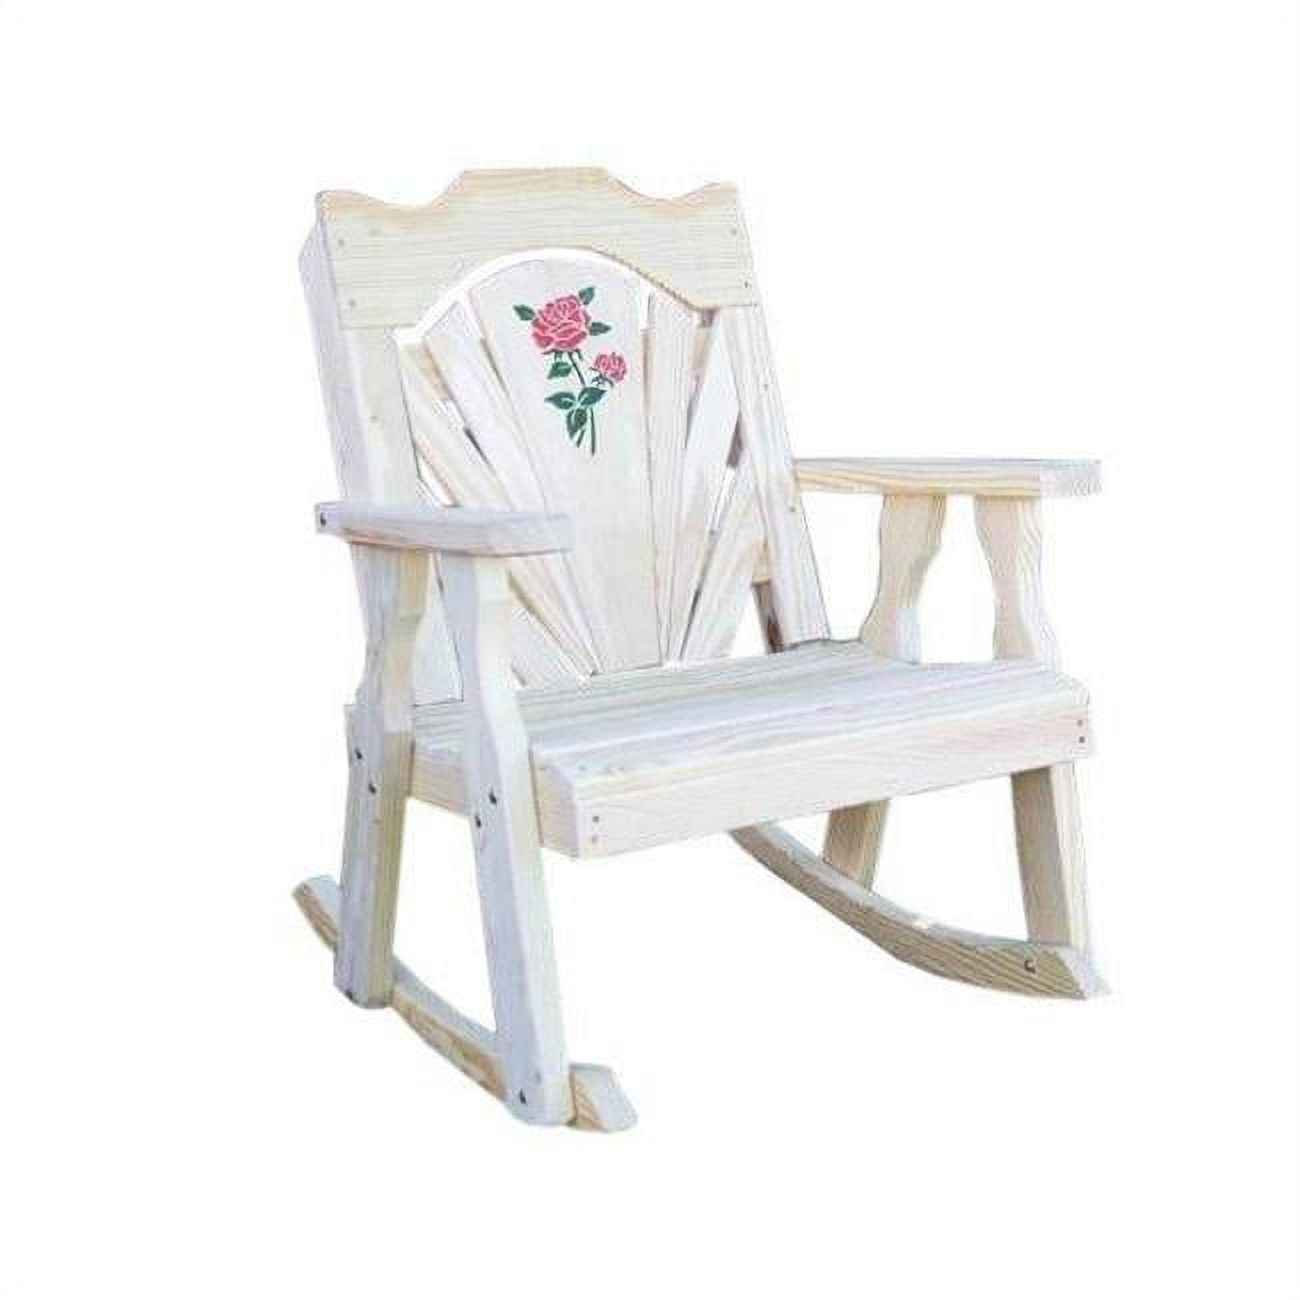 Picture of Creekvine Designs FR24FBROSECVD Treated Pine Fanback Rocking Chair with Rose Design